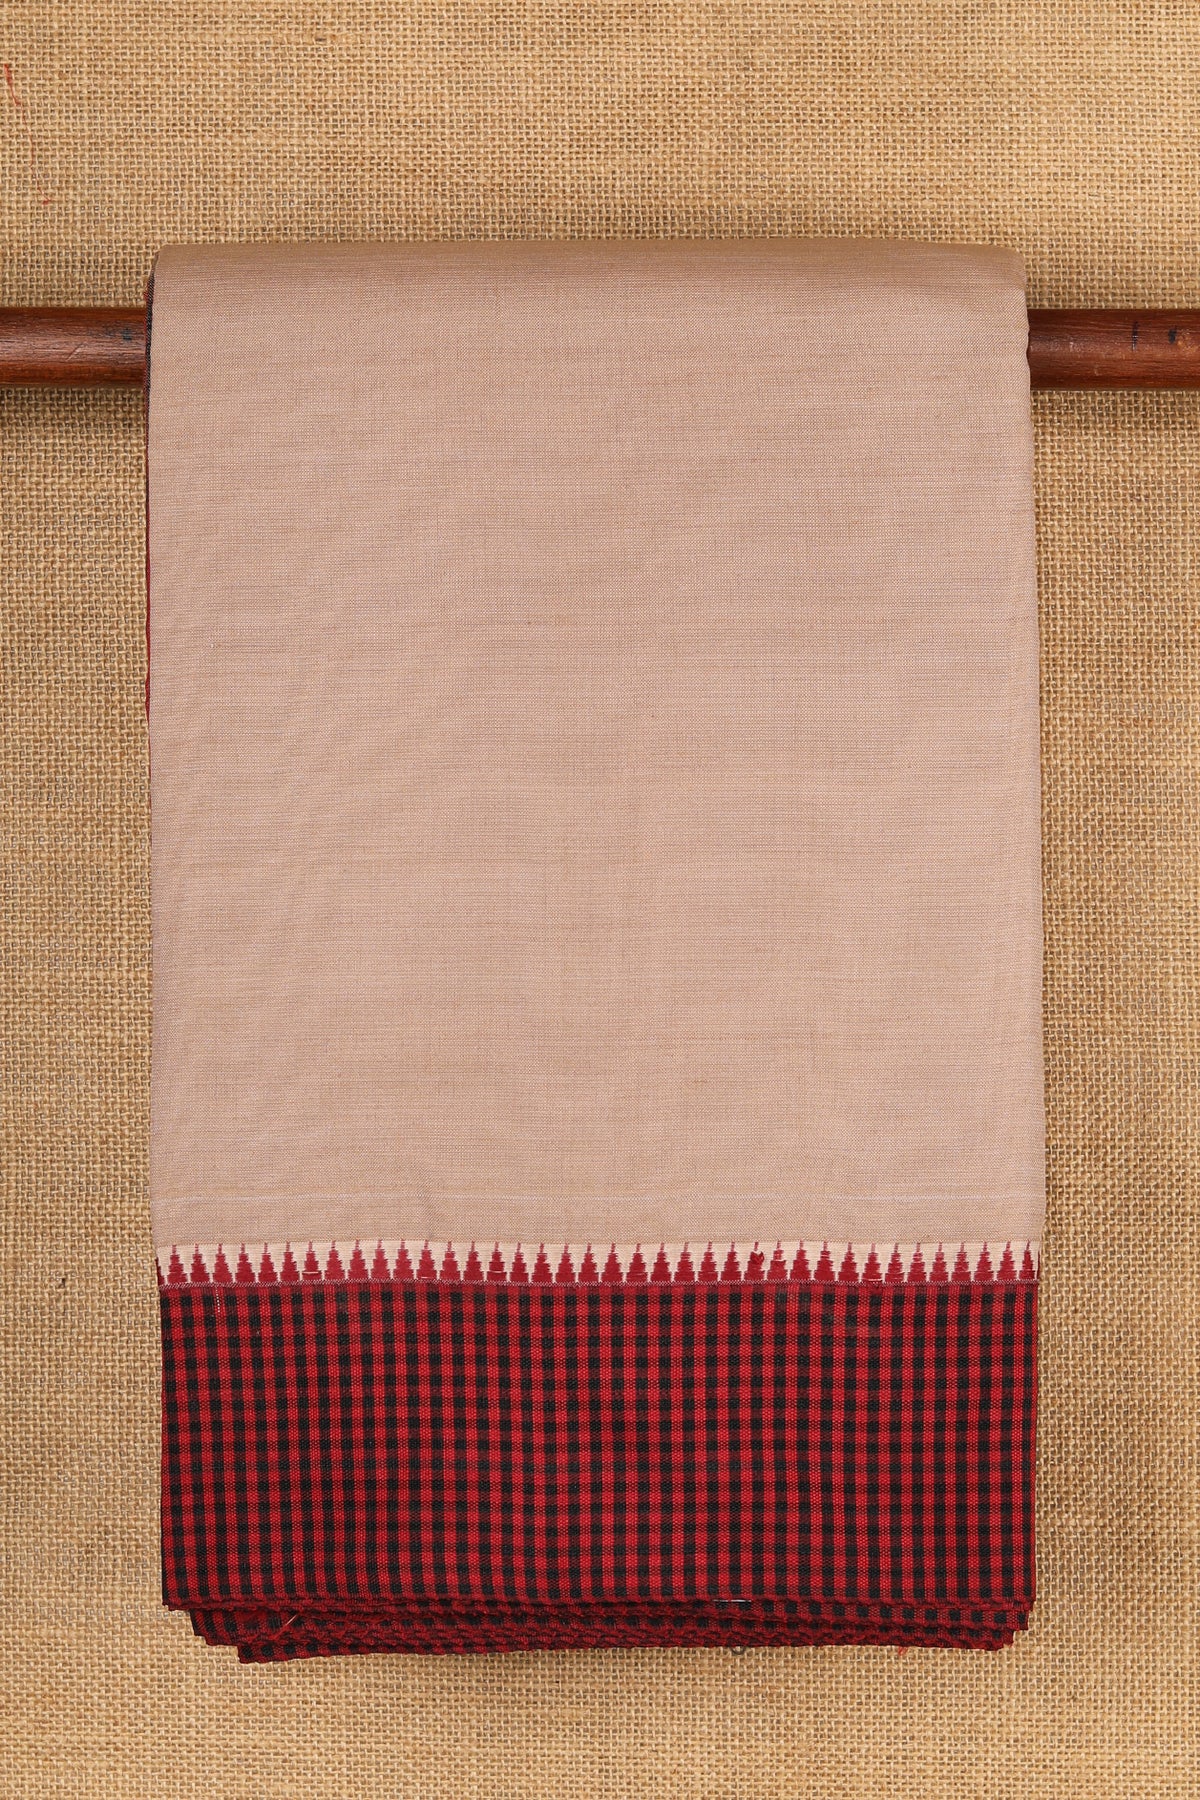 Contrast Checked Border In Plain Light Beige Dharwad Cotton Saree